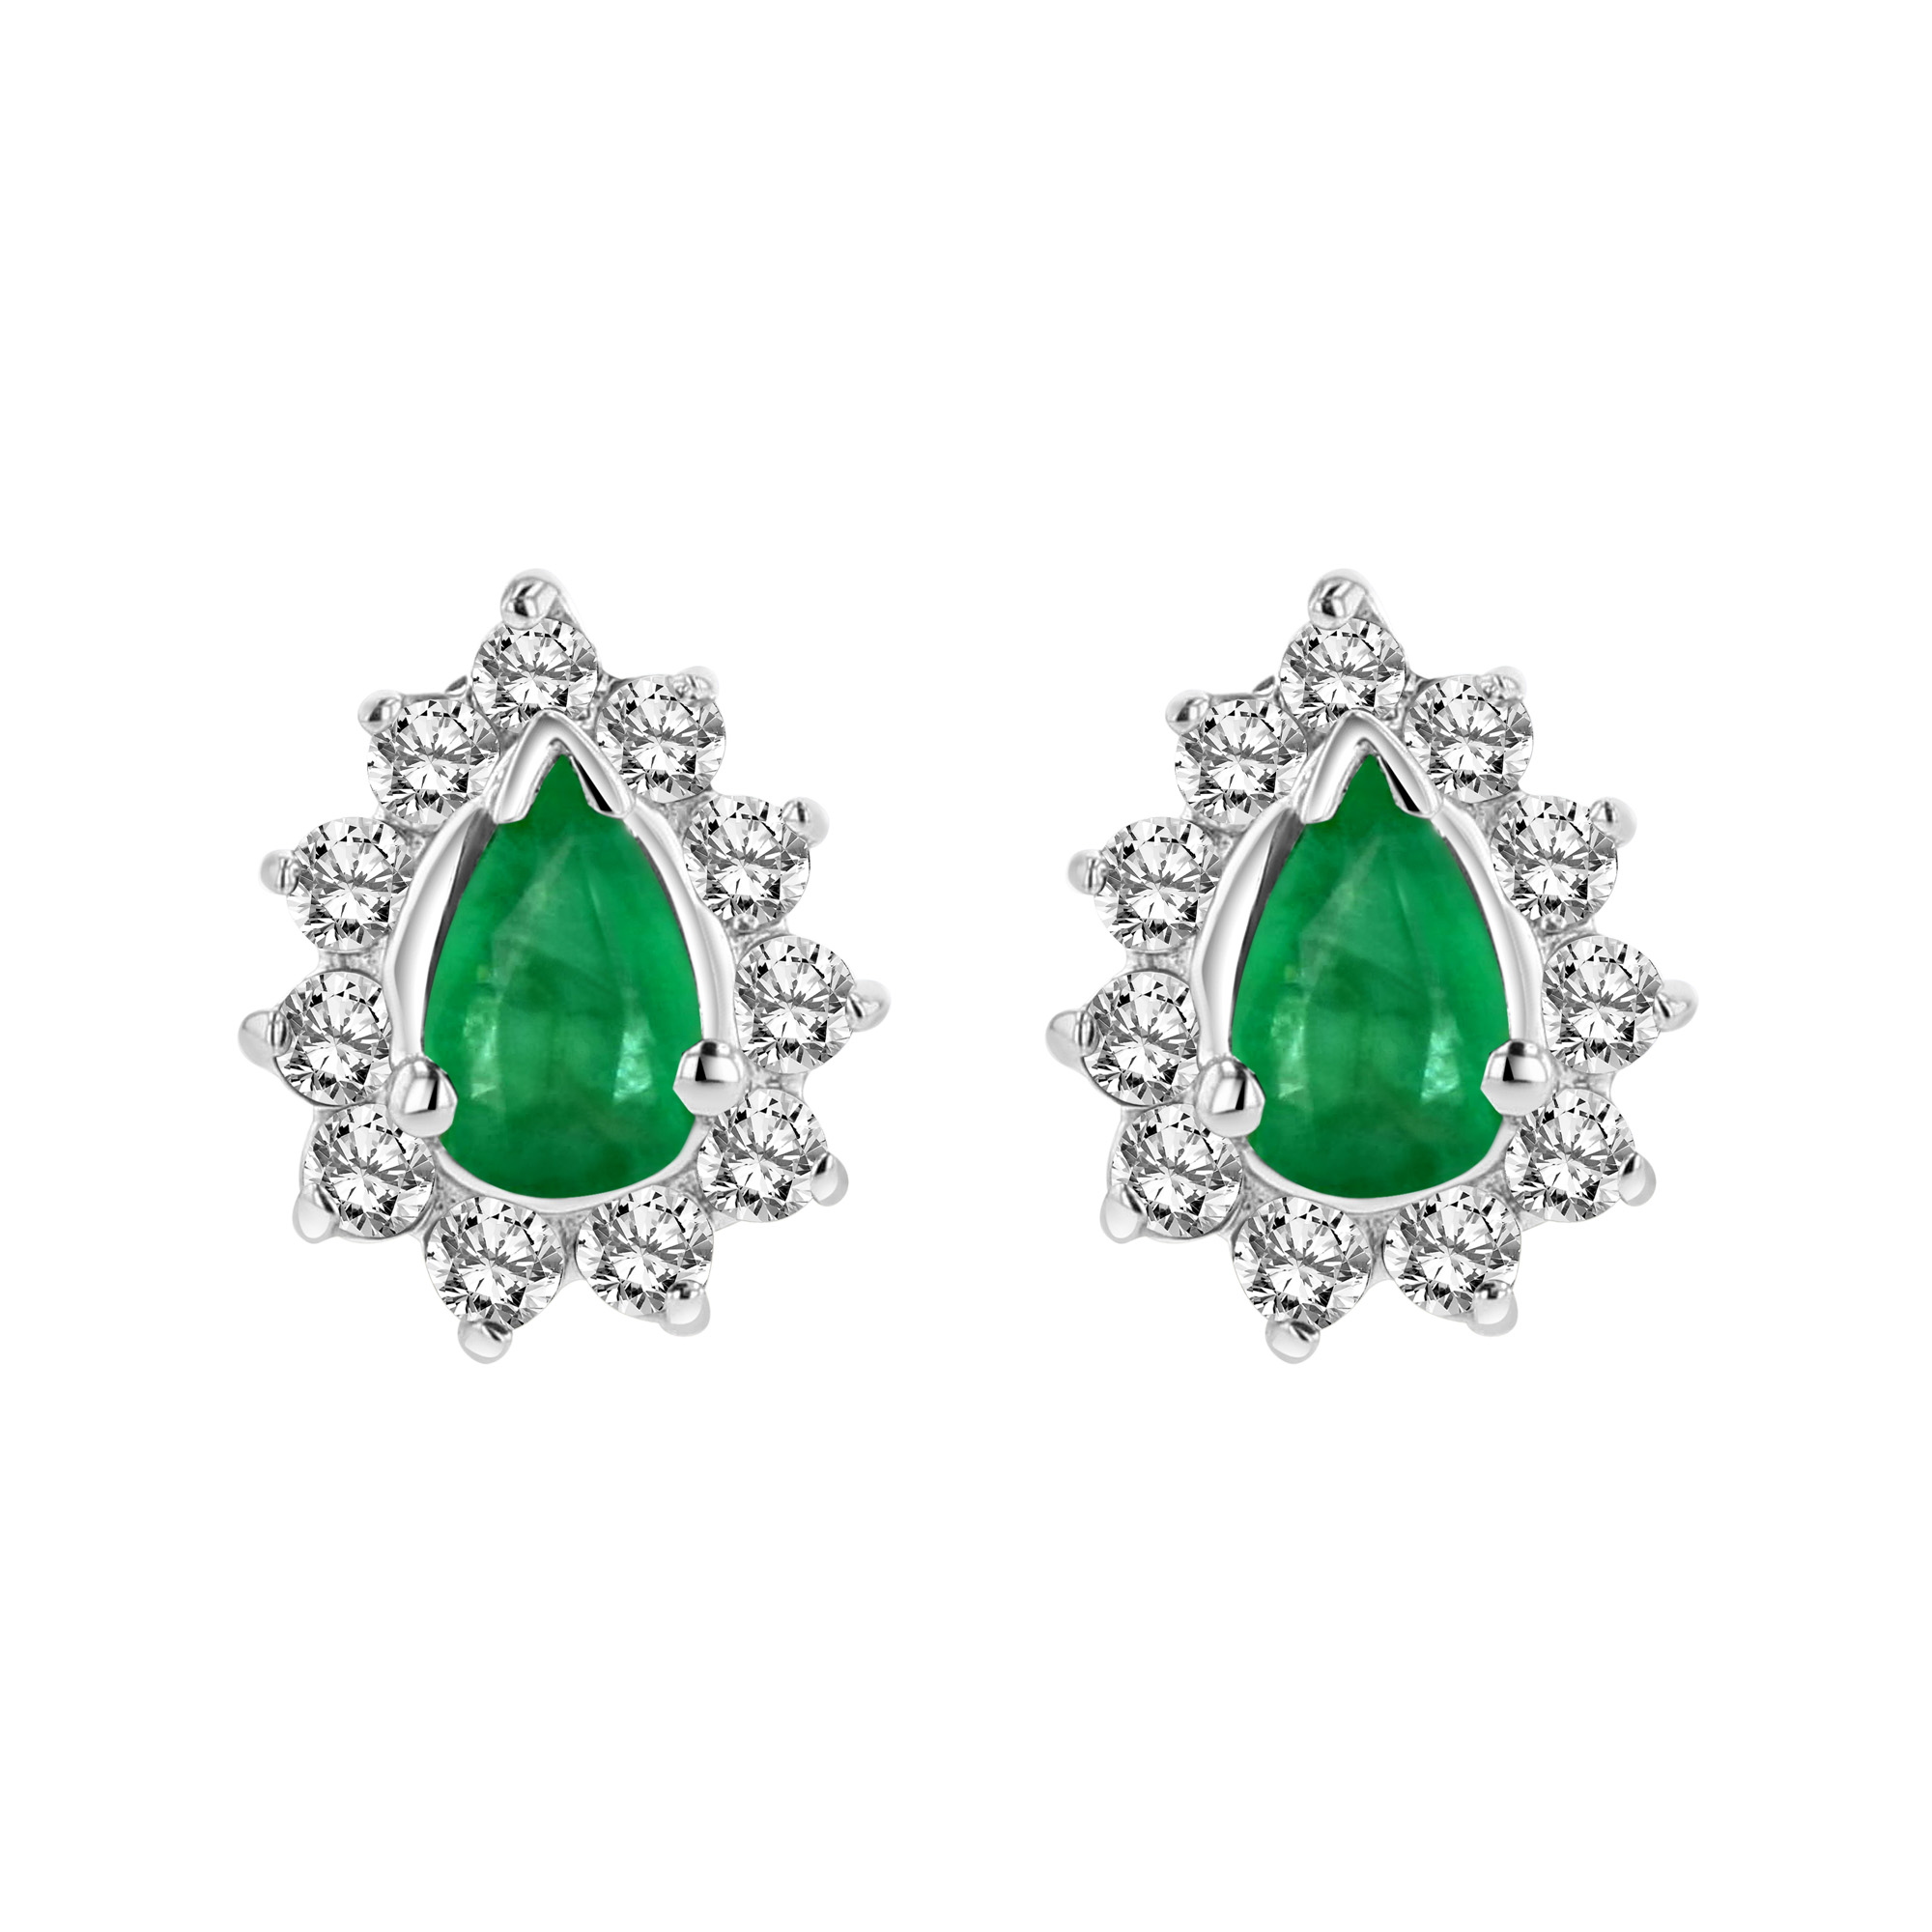 0.70cttw Diamond and Emerald Earrings in 14k Gold 